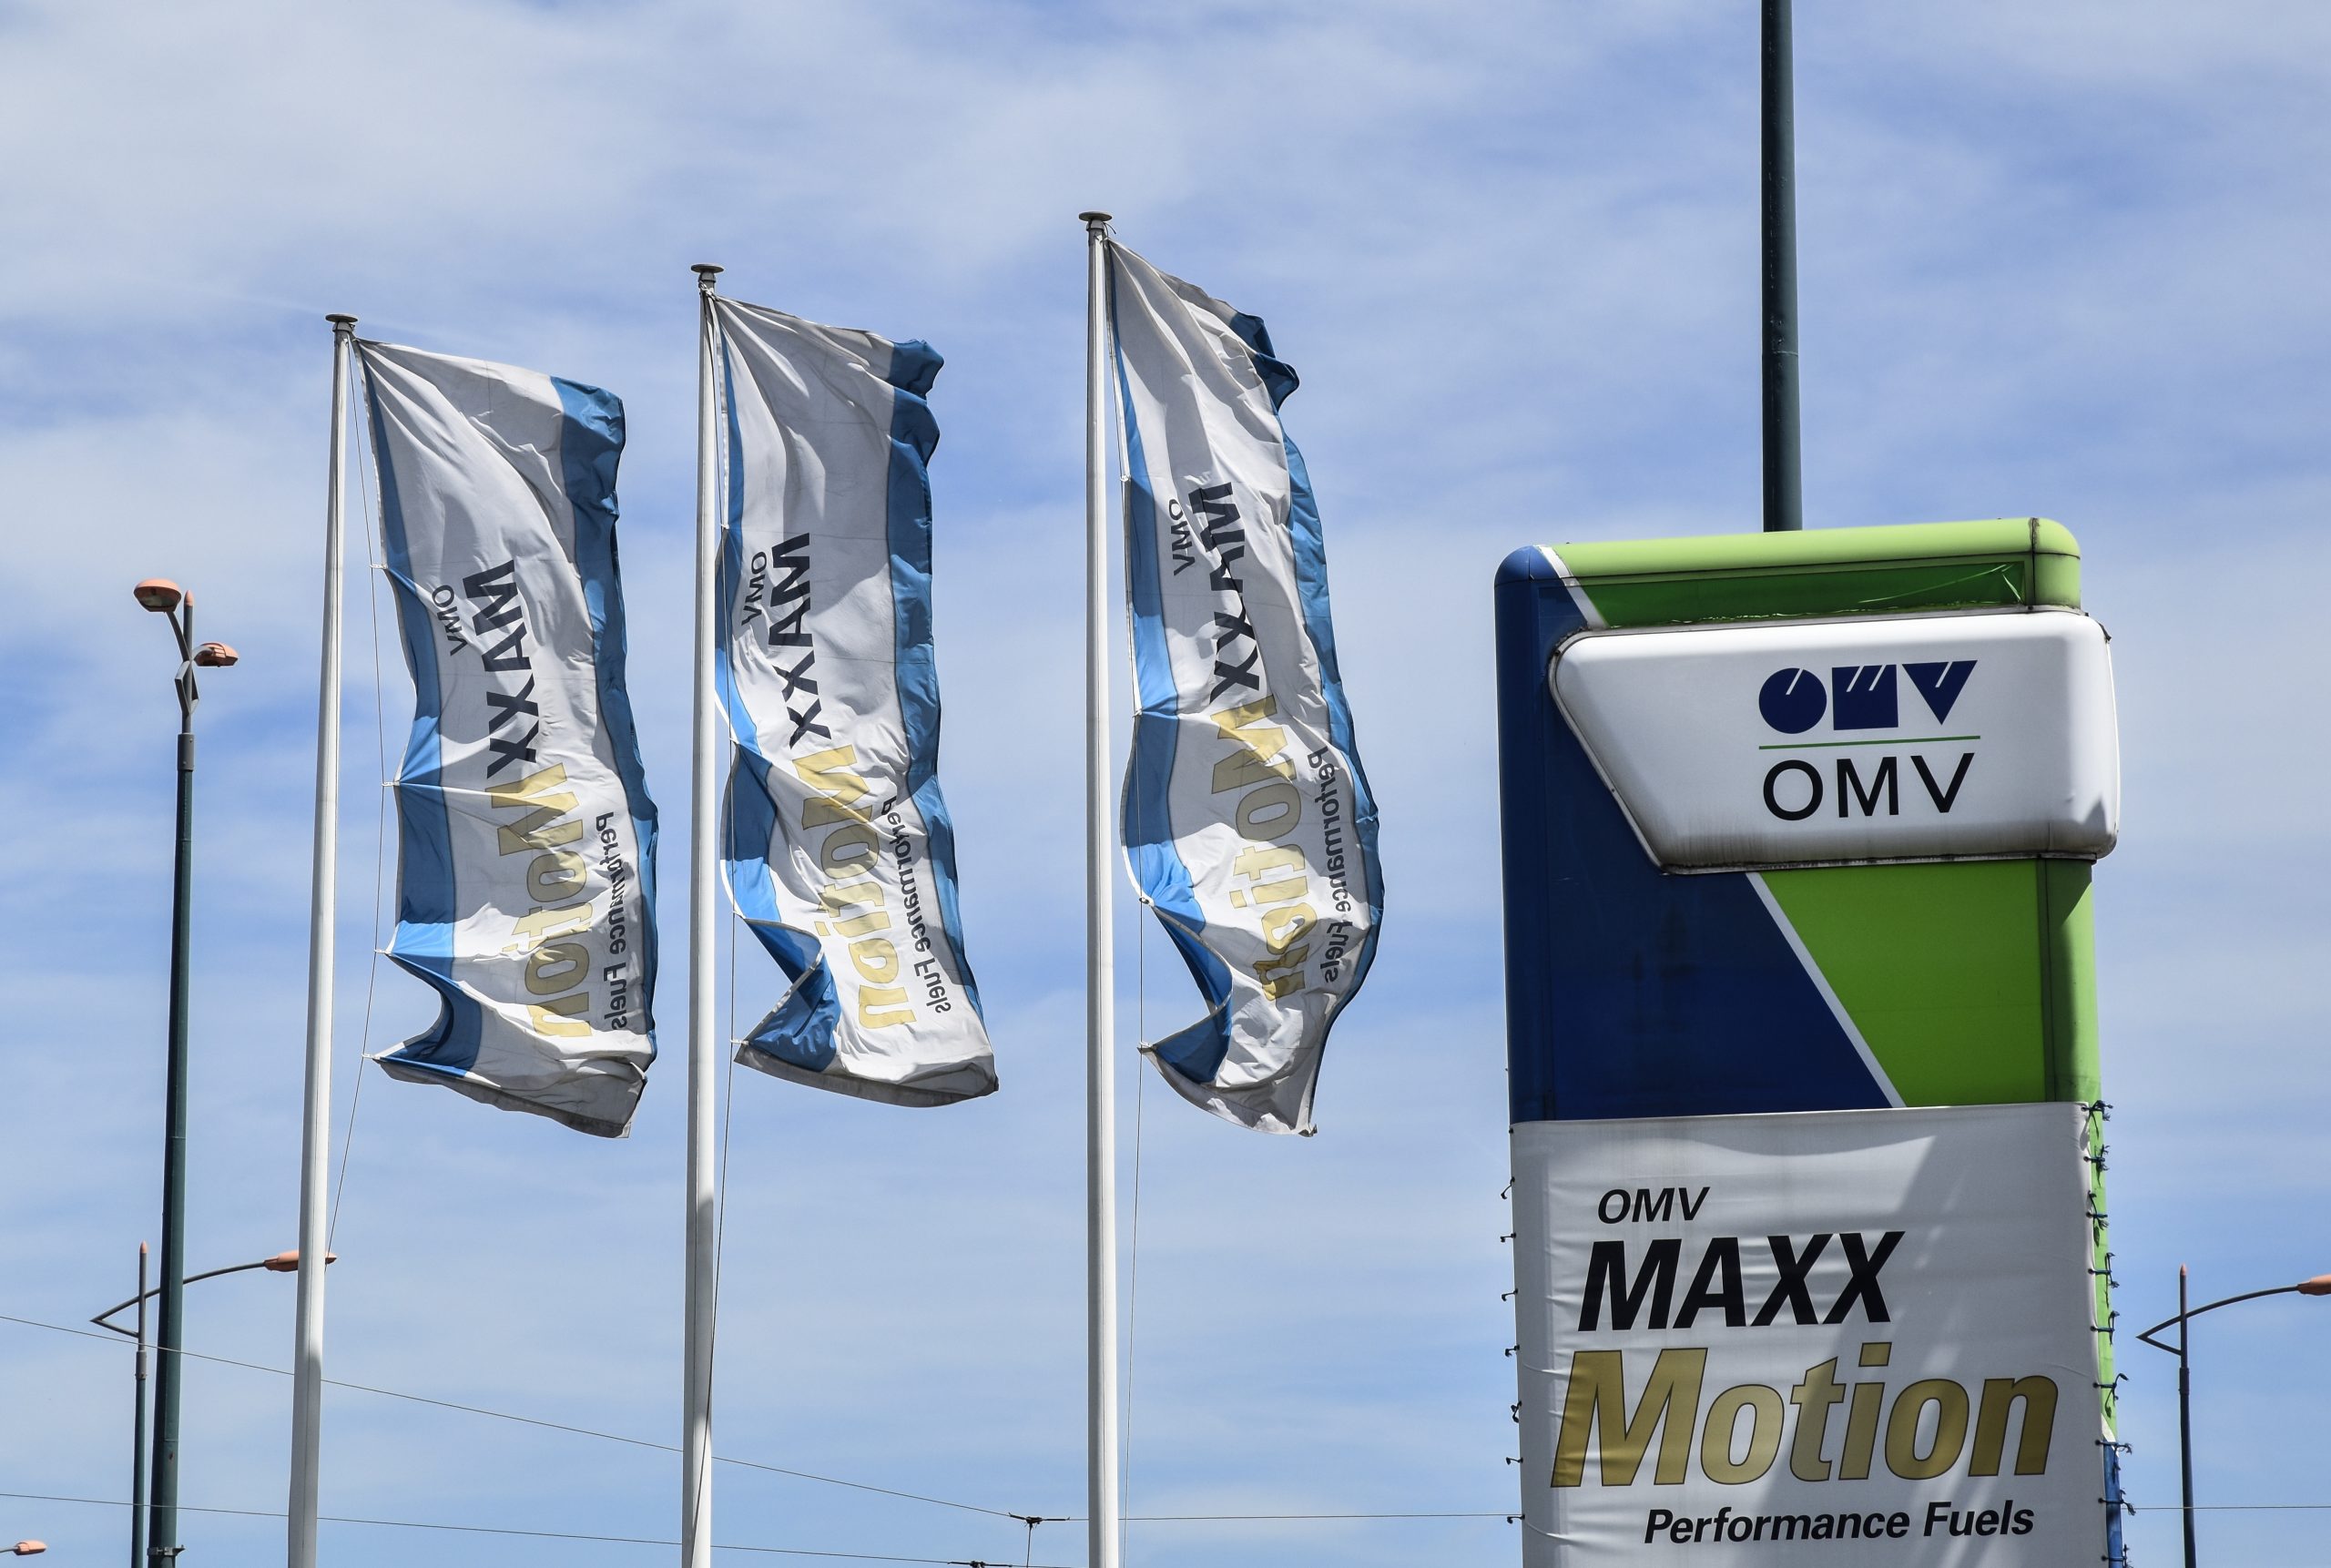 Oil and Gas Analyst: Hungary’s Petrol Stocks Go Towards Helping OMV, but Also Helps MOL